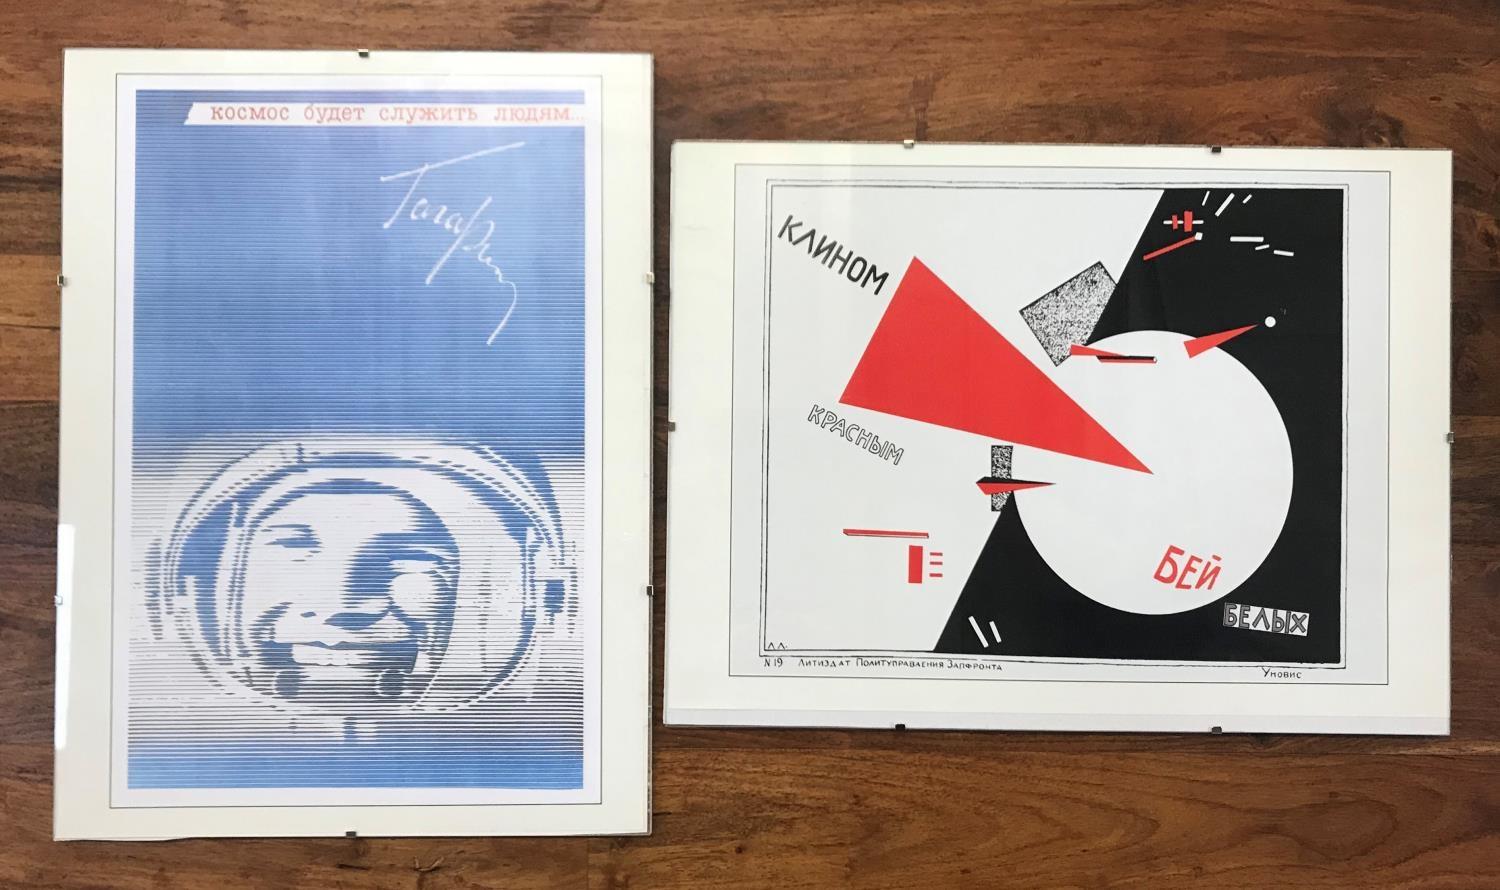 TWO REPRODUCTION RUSSIAN SOVIET ERA PROPOGANDA POSTERS one from 1920 by Eliezer Lissitzky,